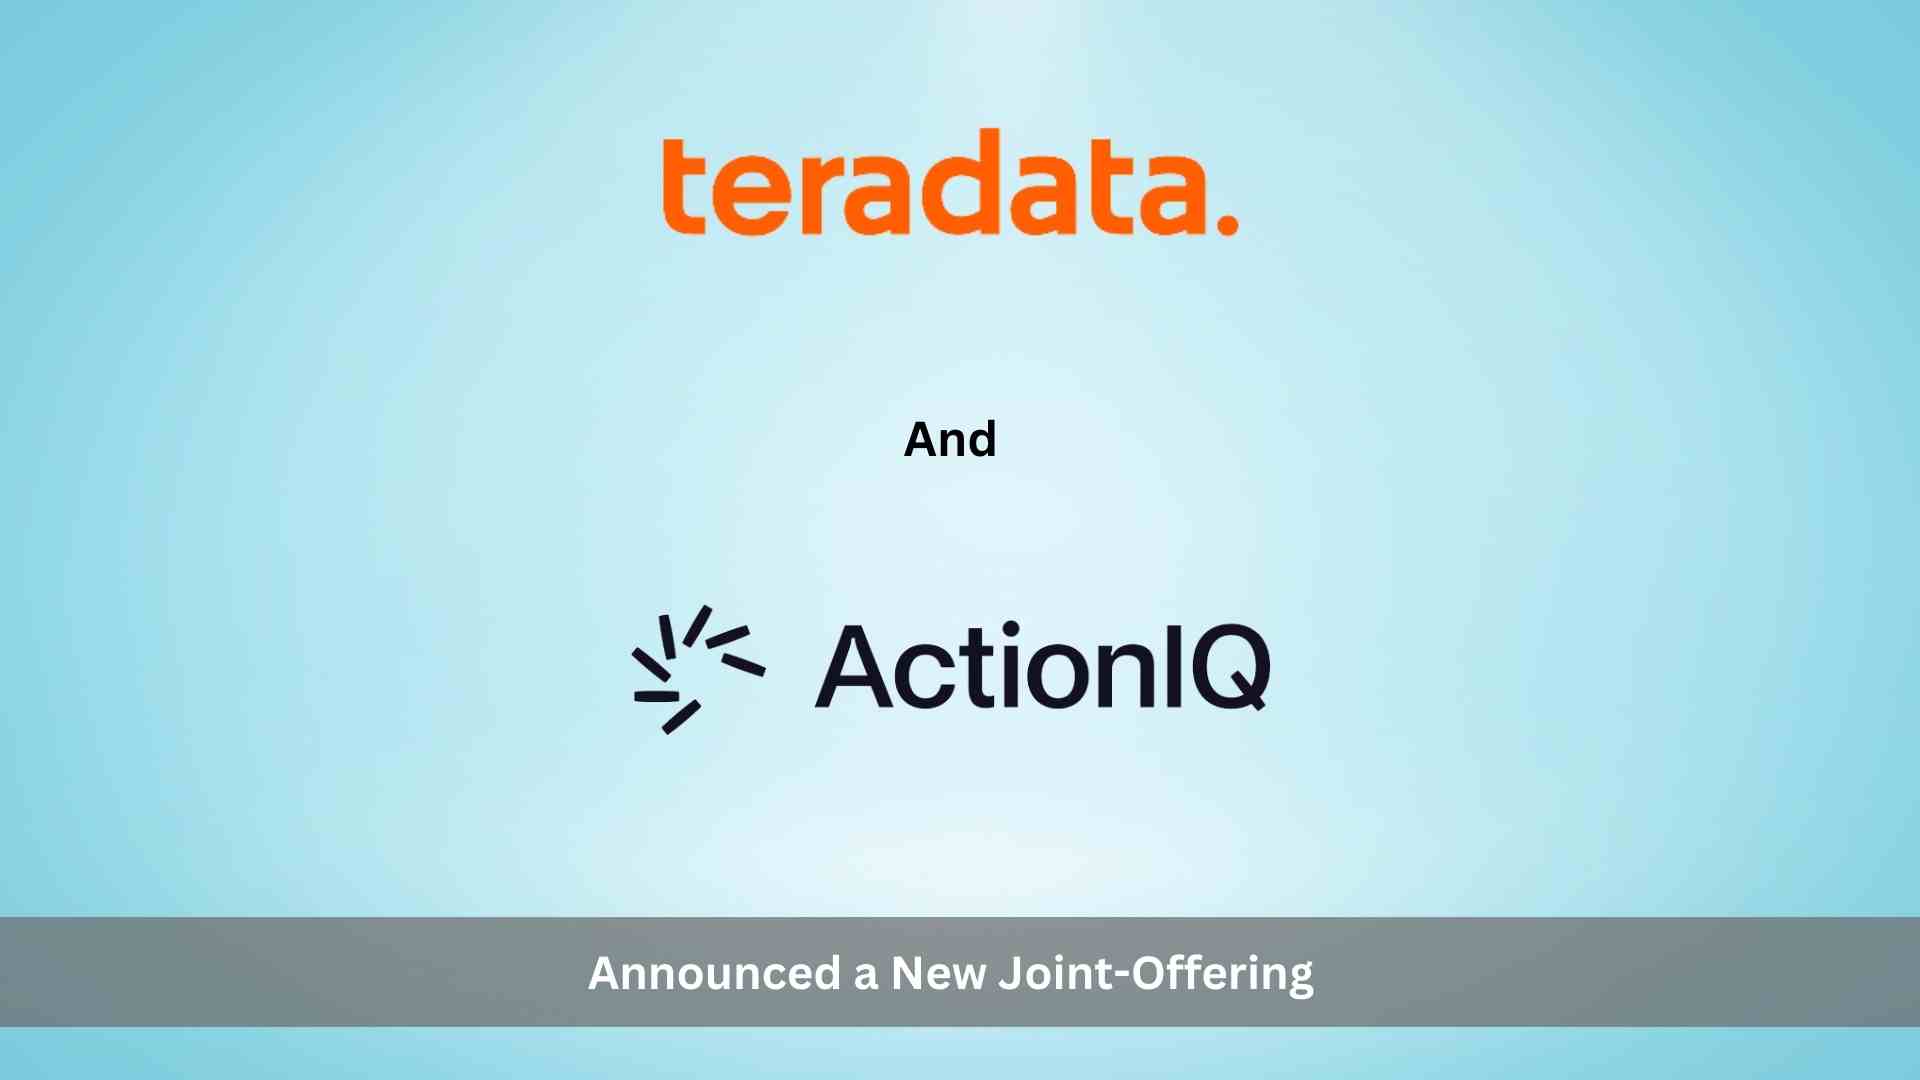 Teradata Partners with ActionIQ on New Marketing and Customer Experience Offering for VantageCloud Customers